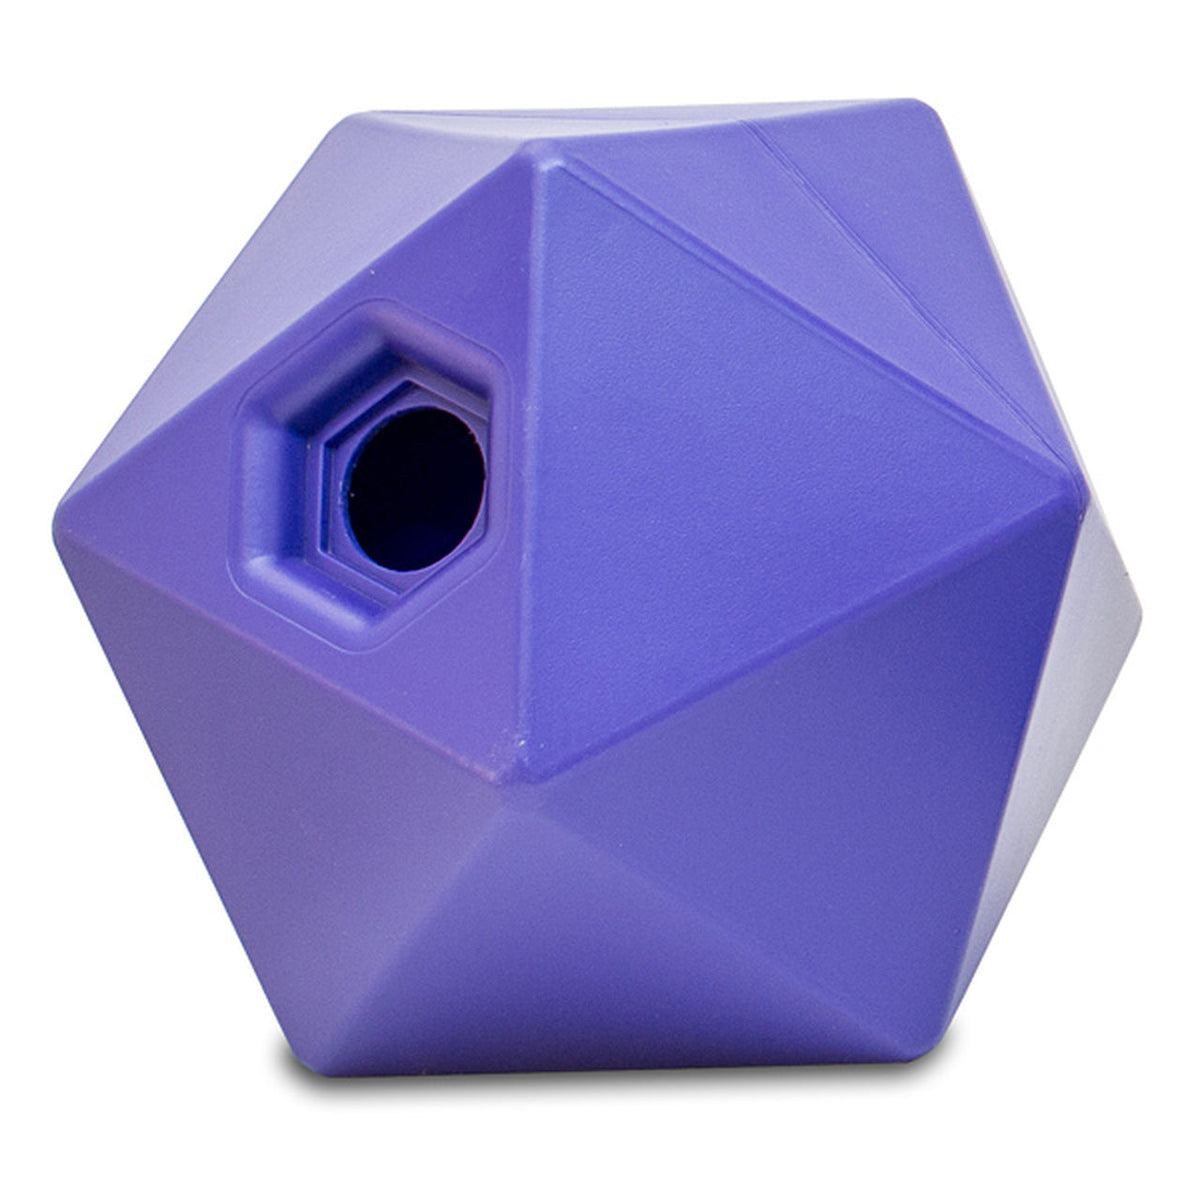 Purple treat ball with numerous flat sides and a small treat opening.